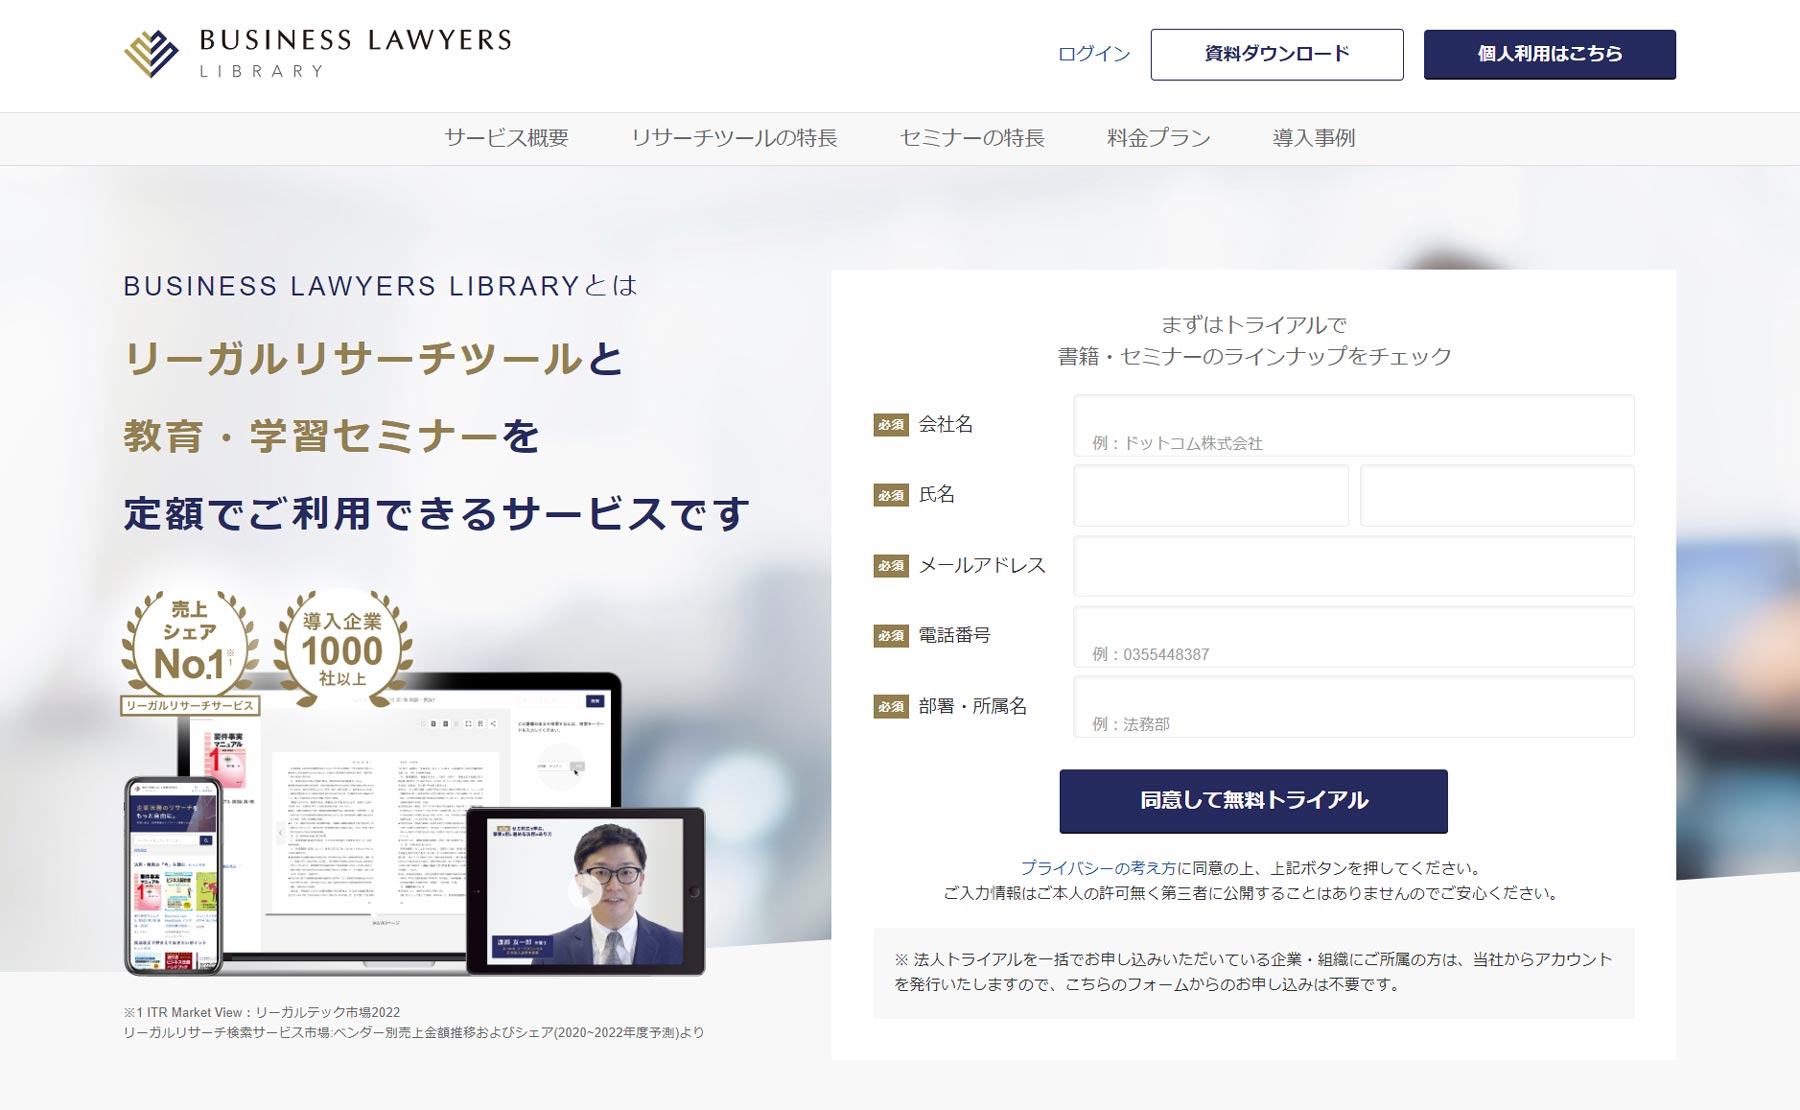 BUSINESS LAWYERS LIBRARY公式Webサイト